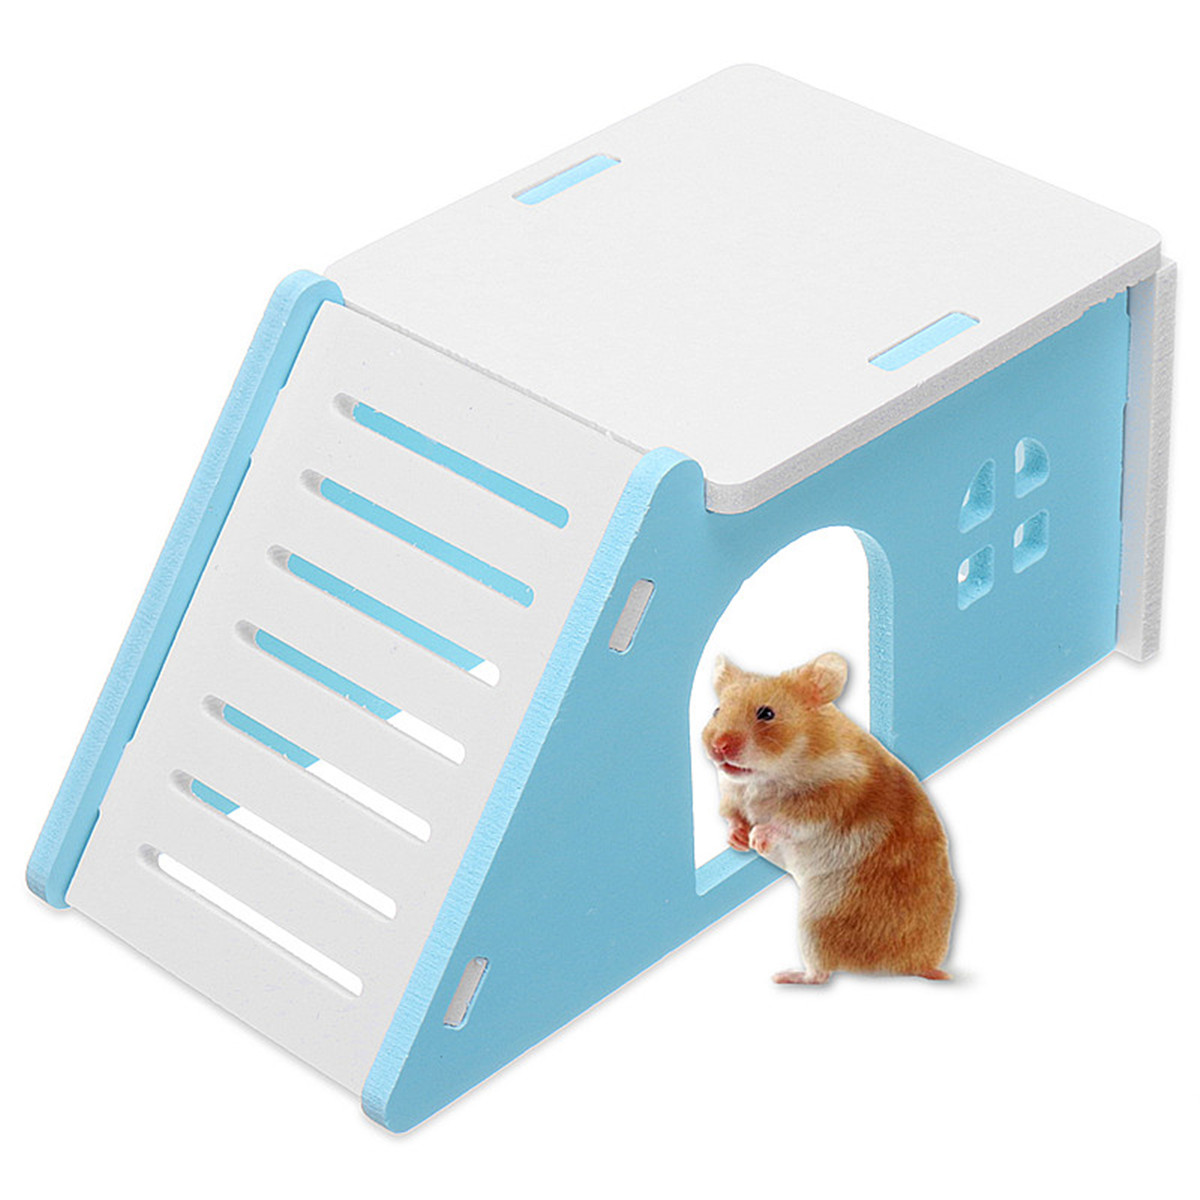 Pet-Mouse-Hamster-House-Villa-Cage-Bed-Liftable-Ladder-Window-Nest-Exercise-Toy-1207141